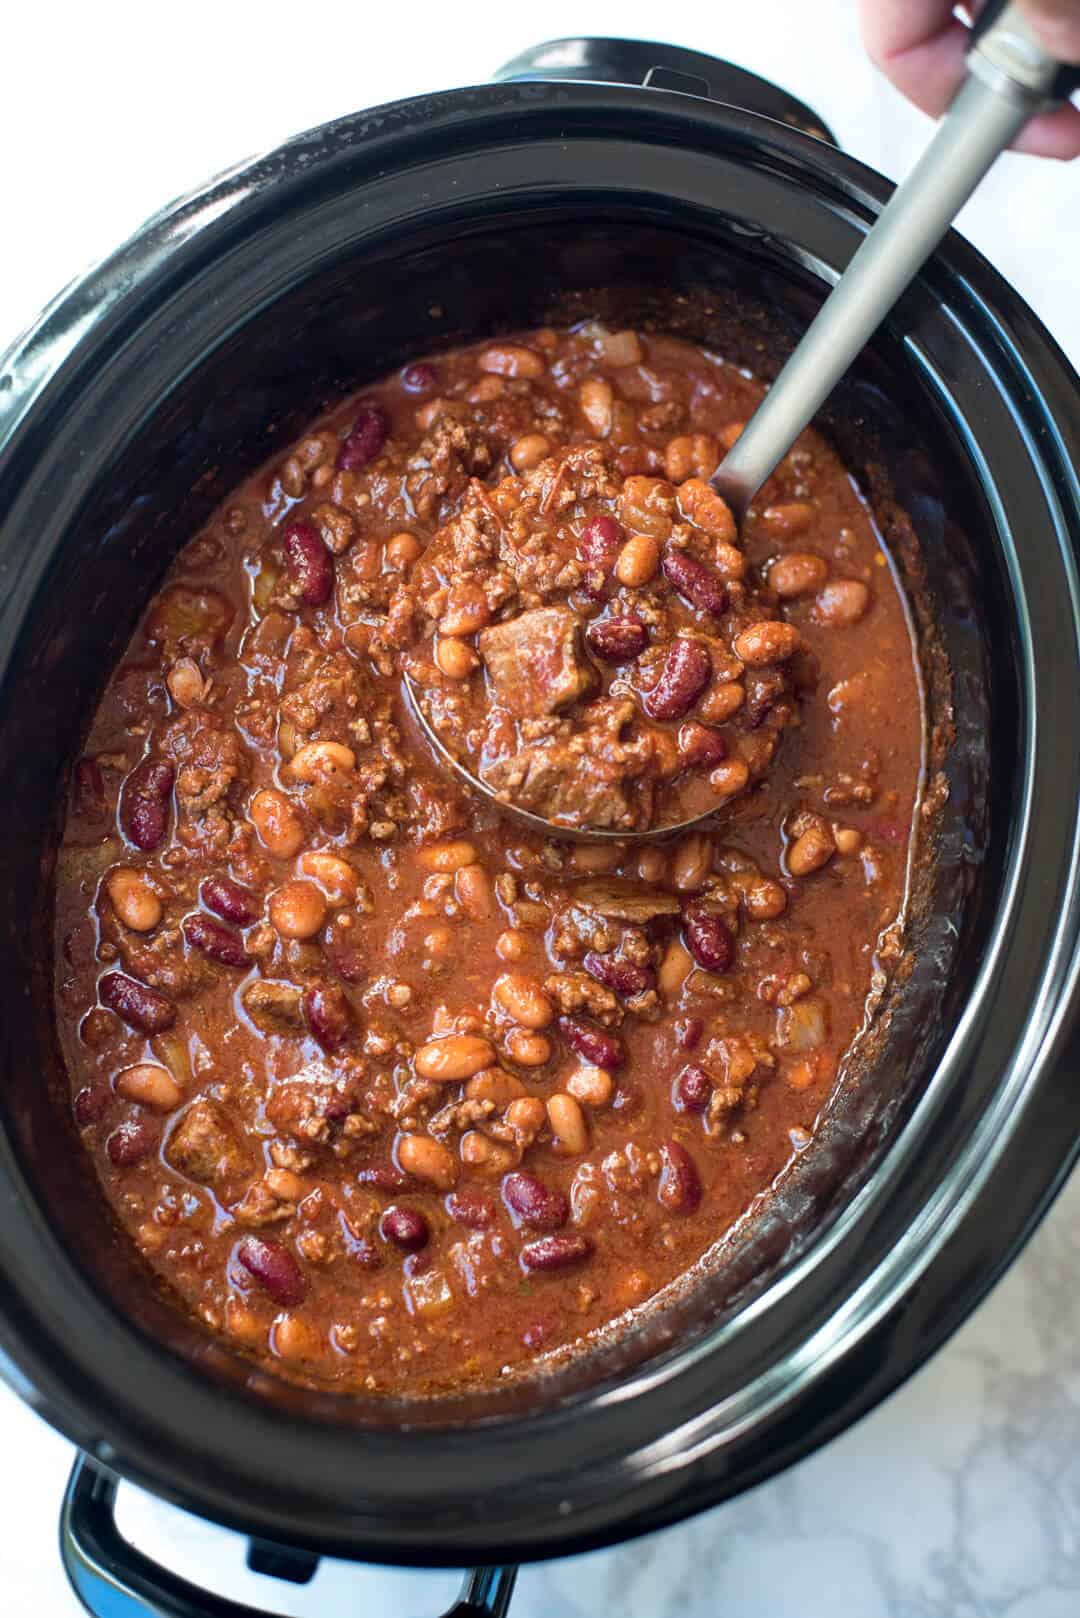 A ladle scoops chili with chunks of beef, ground beef and beans from a slow cooker.